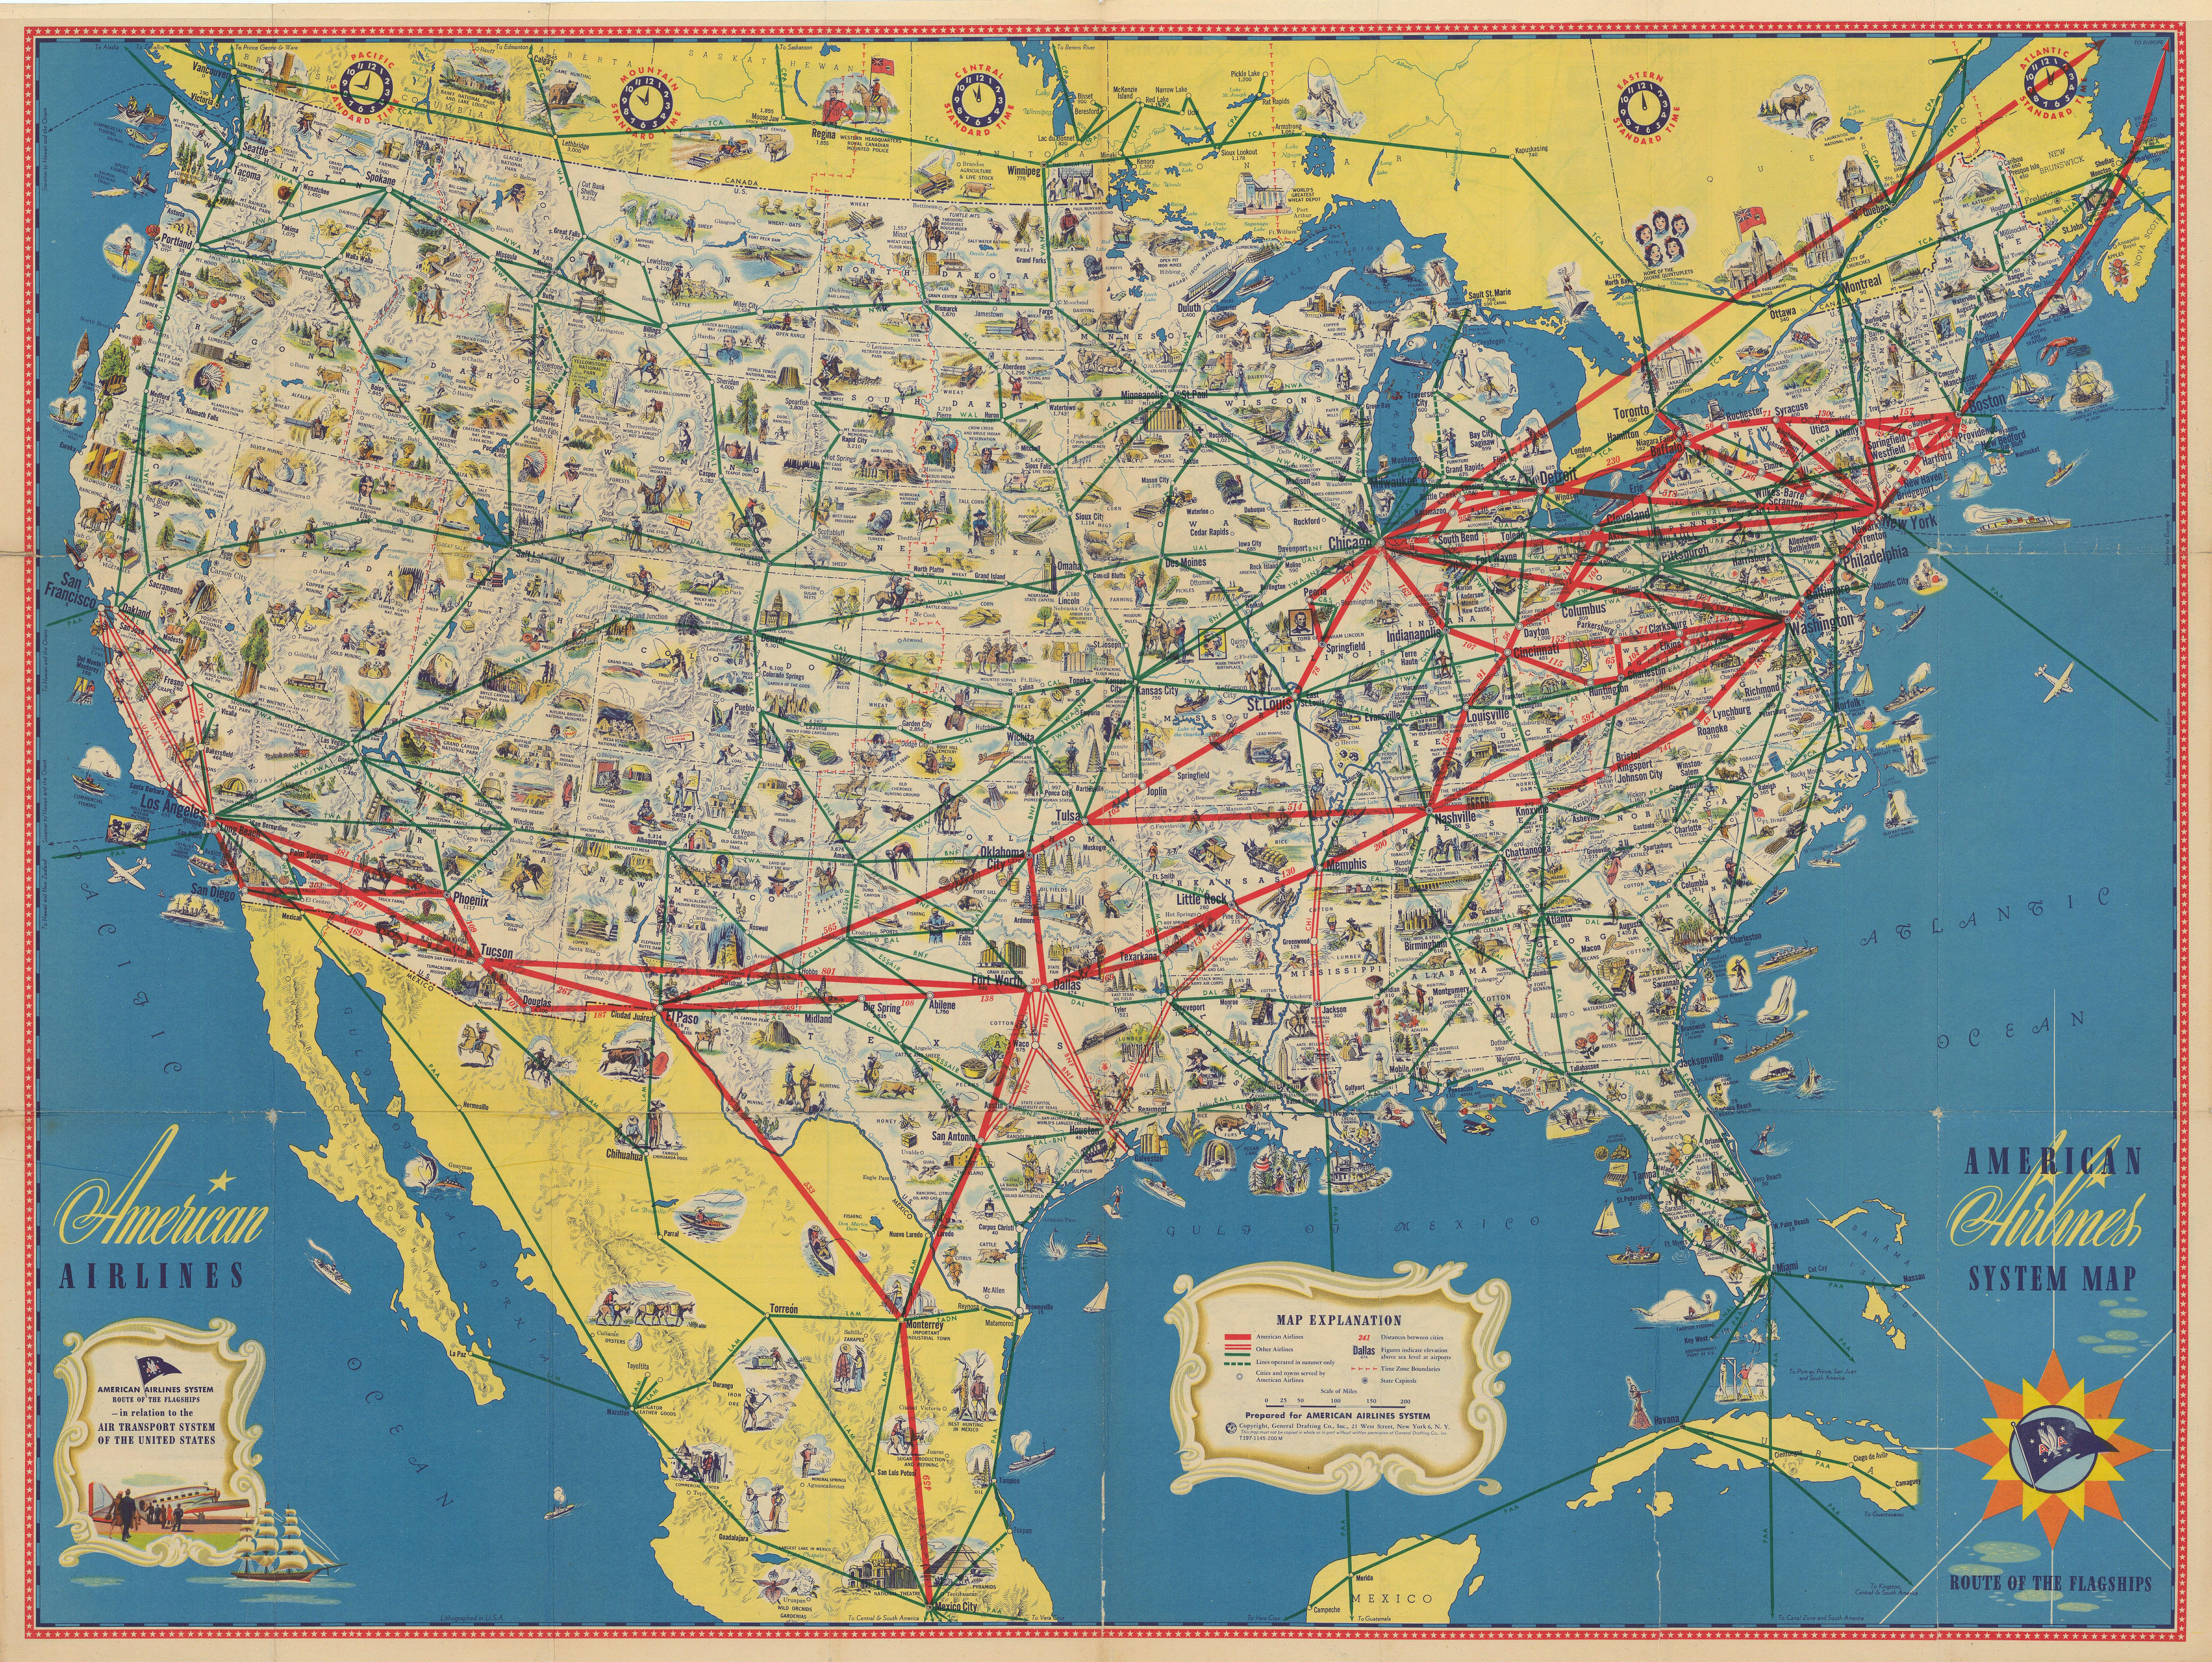 American Airlines System Map. Route of the Flagships. Pictorial 24"x32" c1945